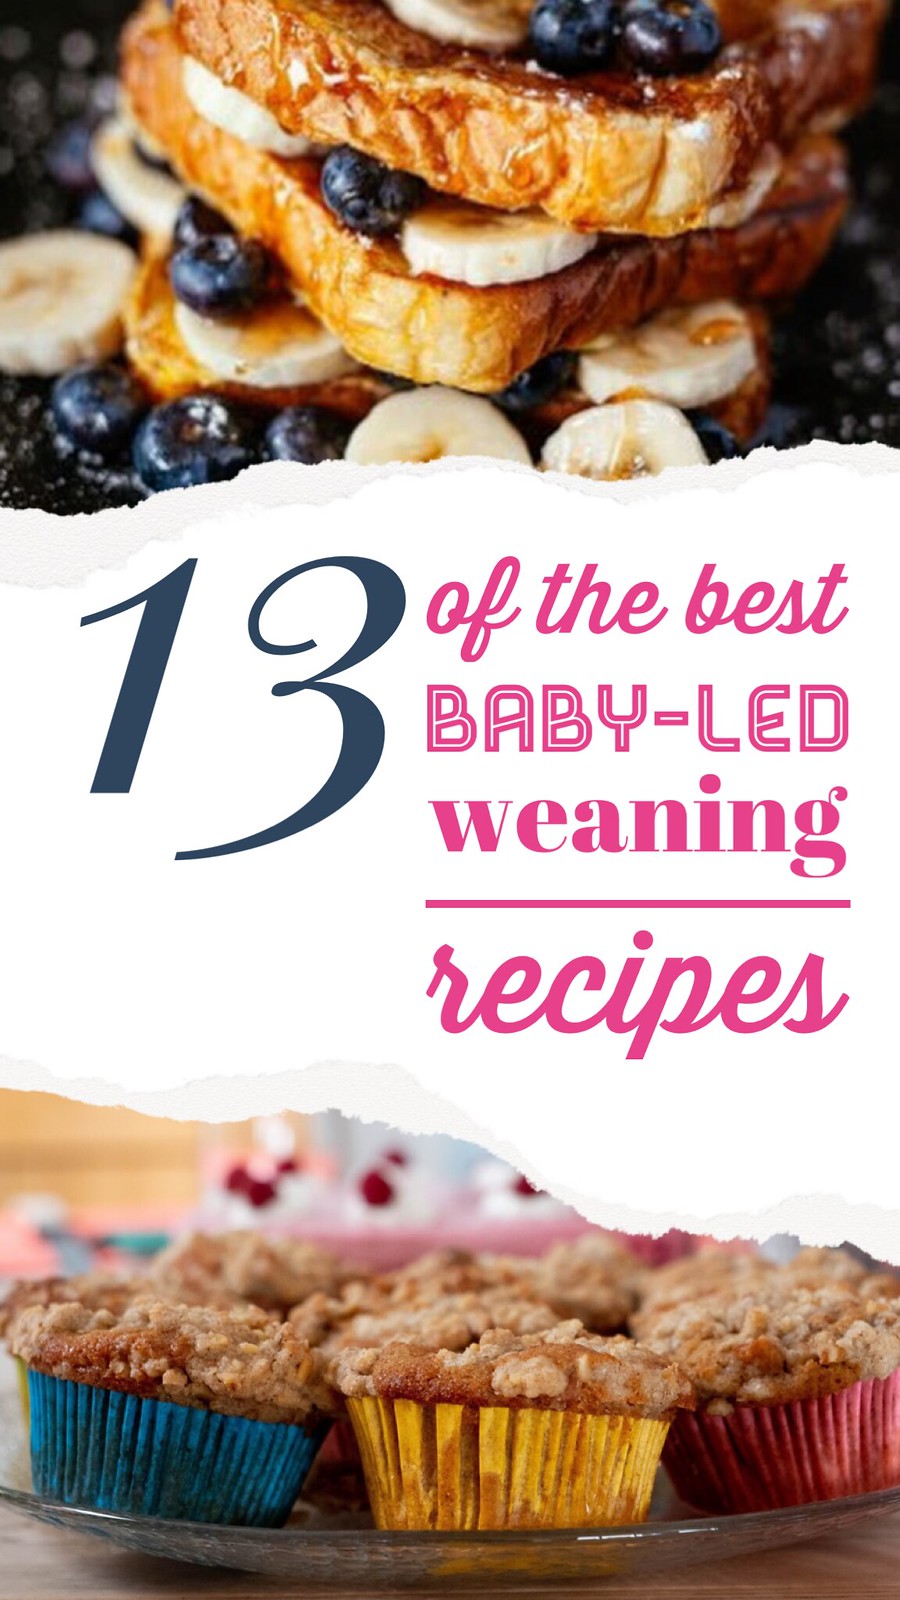 13 of the best baby-led weaning recipes